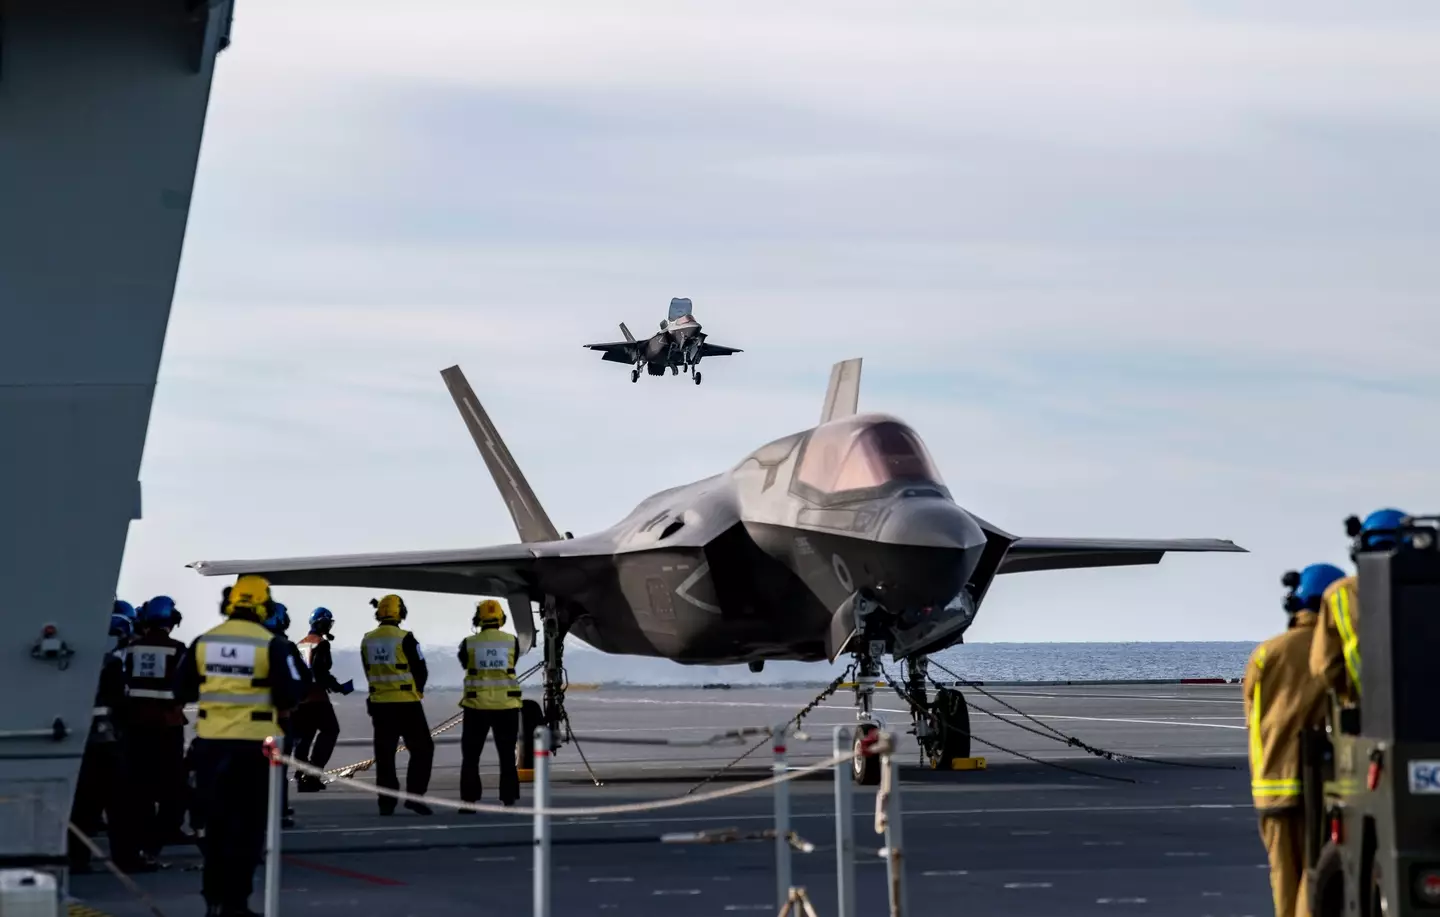 The pilot was forced to eject from their F-35 jet fighter, a plane which costs about £100 million.